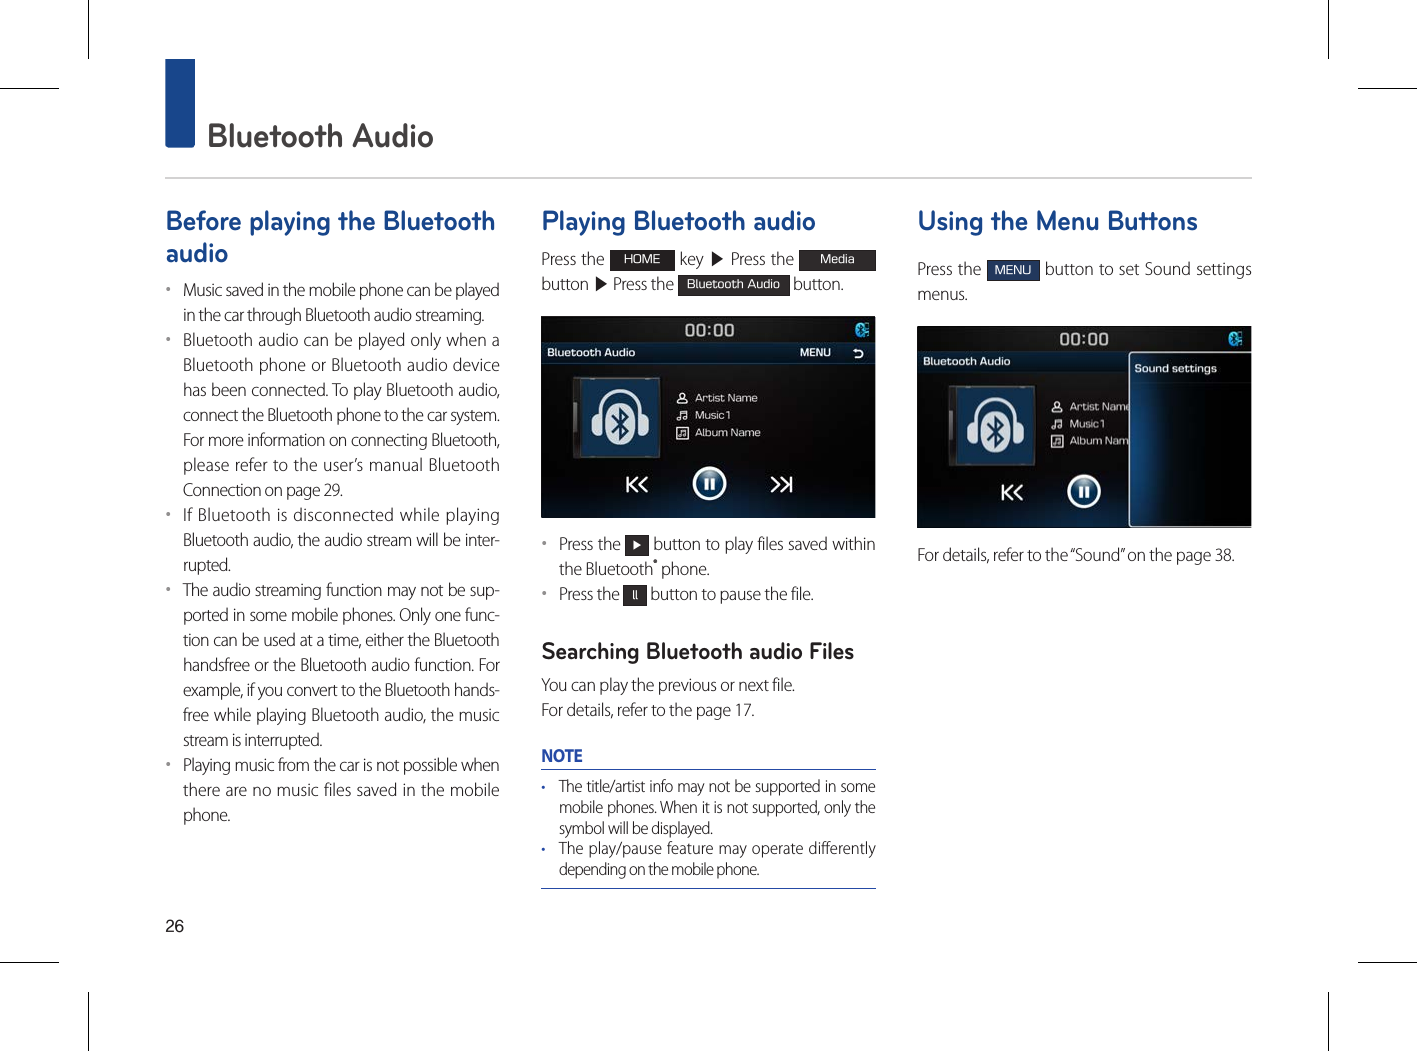 26 Bluetooth AudioBefore playing the Bluetooth audio••Music saved in the mobile phone can be played in the car through Bluetooth audio streaming. ••Bluetooth audio can be played only when a Bluetooth phone or Bluetooth audio device has been connected. To play Bluetooth audio, connect the Bluetooth phone to the car system. For more information on connecting Bluetooth, please refer to the user’s manual Bluetooth Connection on page 29.••If Bluetooth is disconnected while playing Bluetooth audio, the audio stream will be inter-rupted. ••The audio streaming function may not be sup-ported in some mobile phones. Only one func-tion can be used at a time, either the Bluetooth handsfree or the Bluetooth audio function. For example, if you convert to the Bluetooth hands-free while playing Bluetooth audio, the music stream is interrupted. ••Playing music from the car is not possible when there are no music files saved in the mobile phone. Playing Bluetooth audioPress the HOME key ▶ Press the Media button ▶ Press the Bluetooth Audio button.••Press the ▶ button to play files saved within the Bluetooth® phone.••Press the ll button to pause the file.Searching Bluetooth audio FilesYou can play the previous or next file. For details, refer to the page 17.NOTE• The title/artist info may not be supported in some mobile phones. When it is not supported, only the symbol will be displayed.• The play/pause feature may operate differently depending on the mobile phone.Using the Menu ButtonsPress the MENU button to set Sound settings menus.For details, refer to the “Sound” on the page 38.